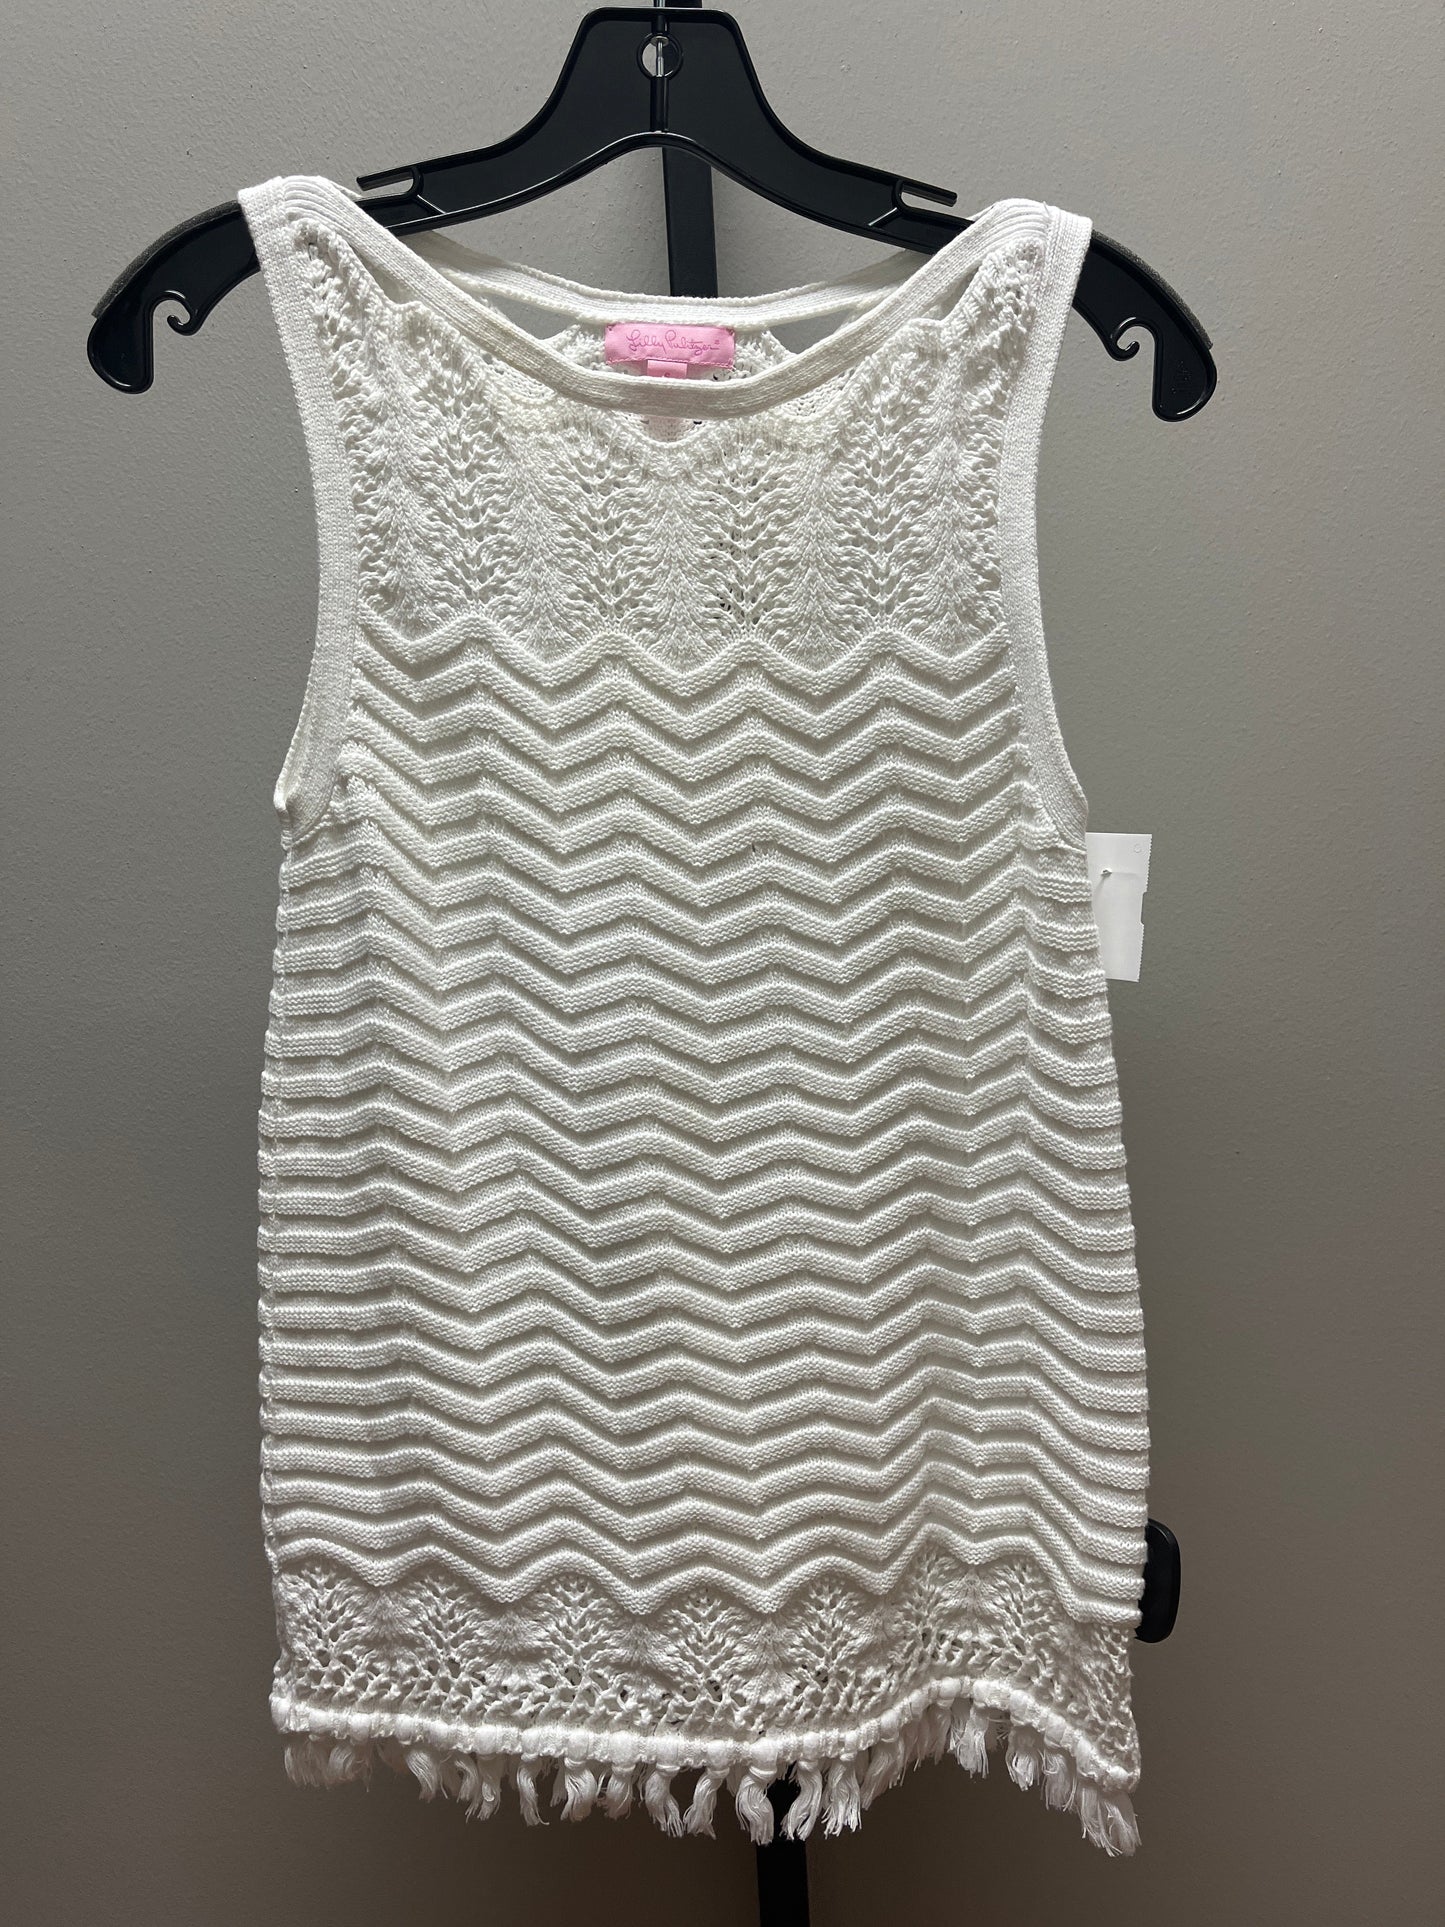 White Top Sleeveless Lilly Pulitzer, Size S